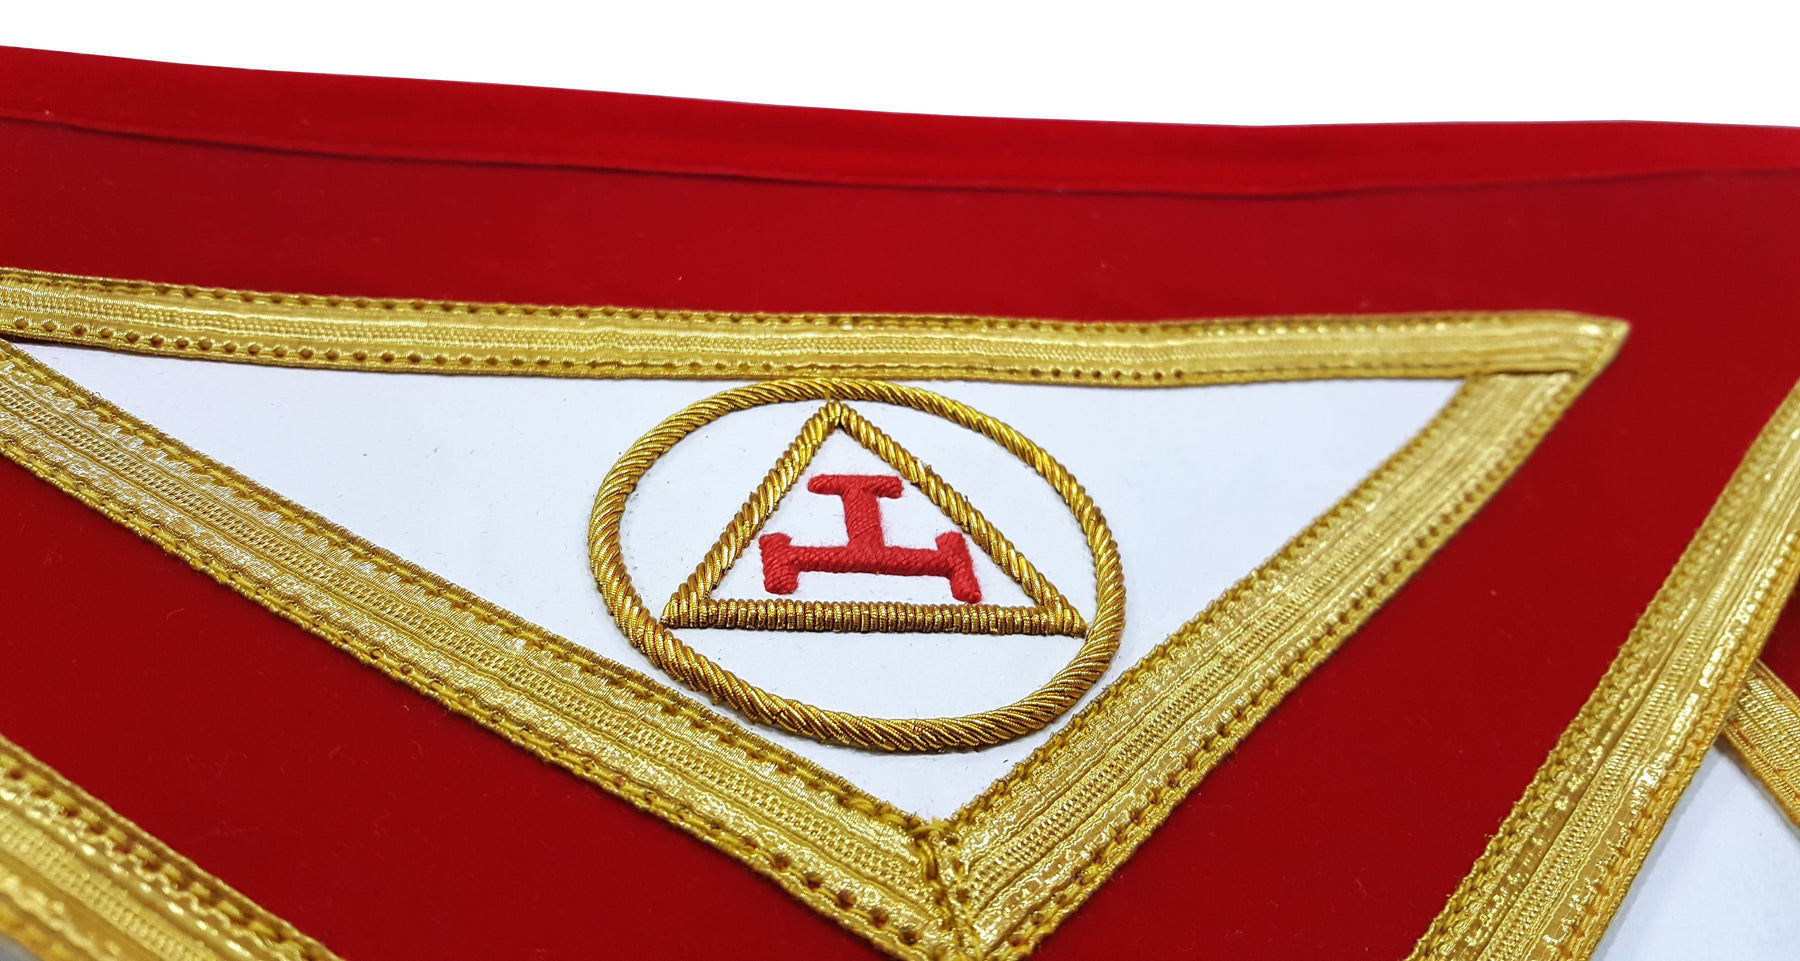 Past High Priest Royal Arch Chapter Apron - Red with Gold Braid - Bricks Masons